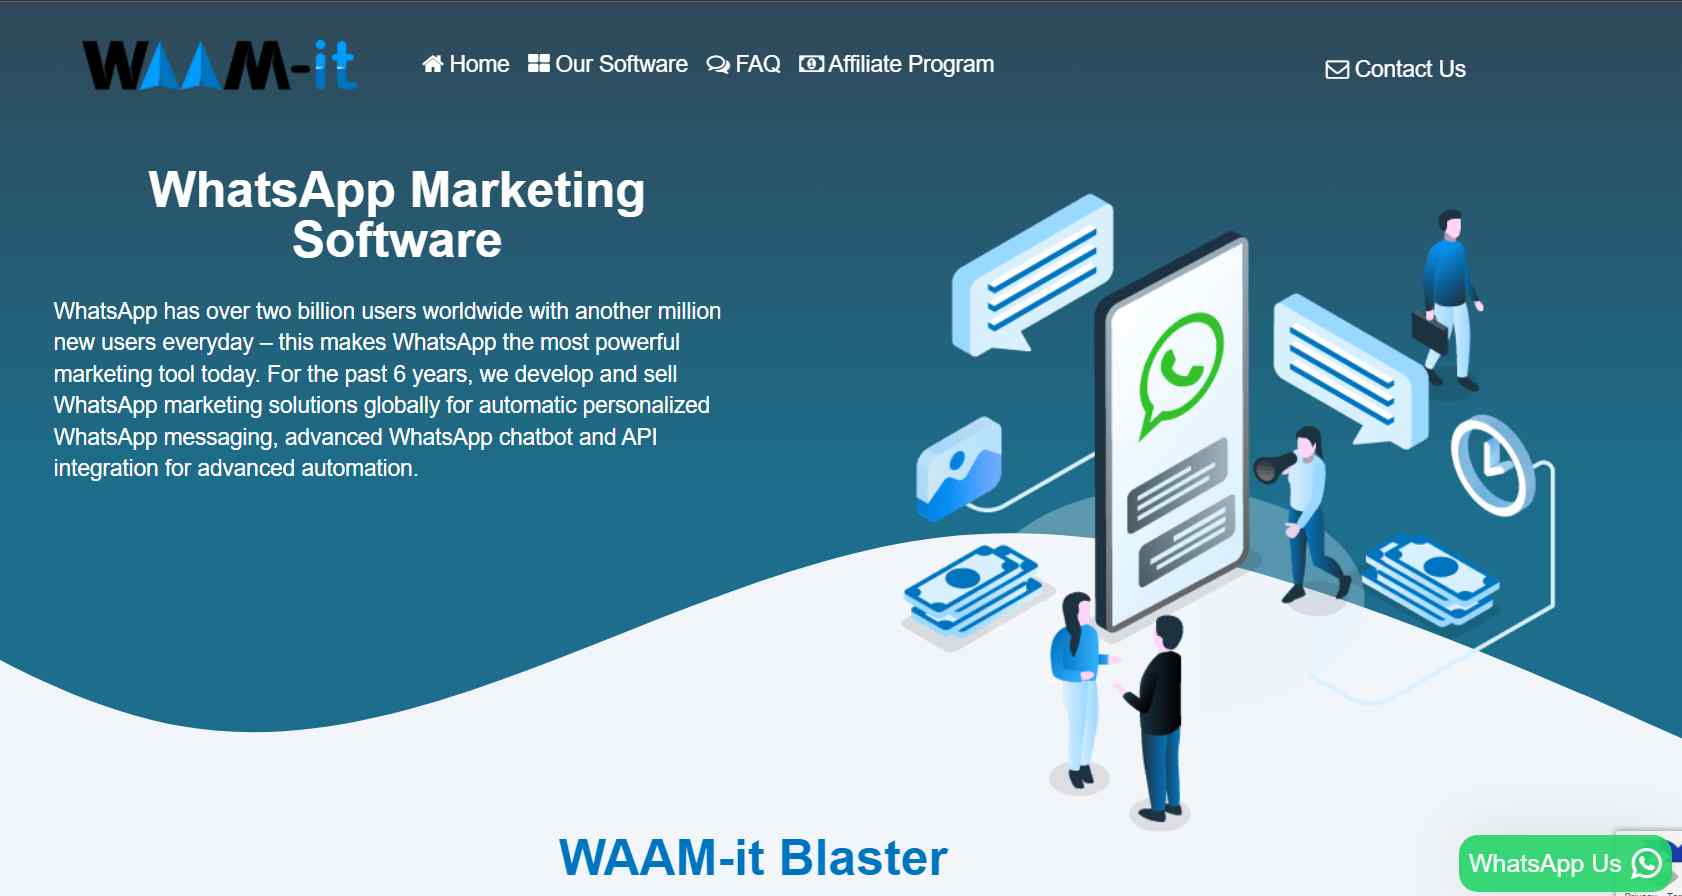 WAAM-it Blaster is a revolutionary new way to send messages, share files, and send data to anyone worldwide.